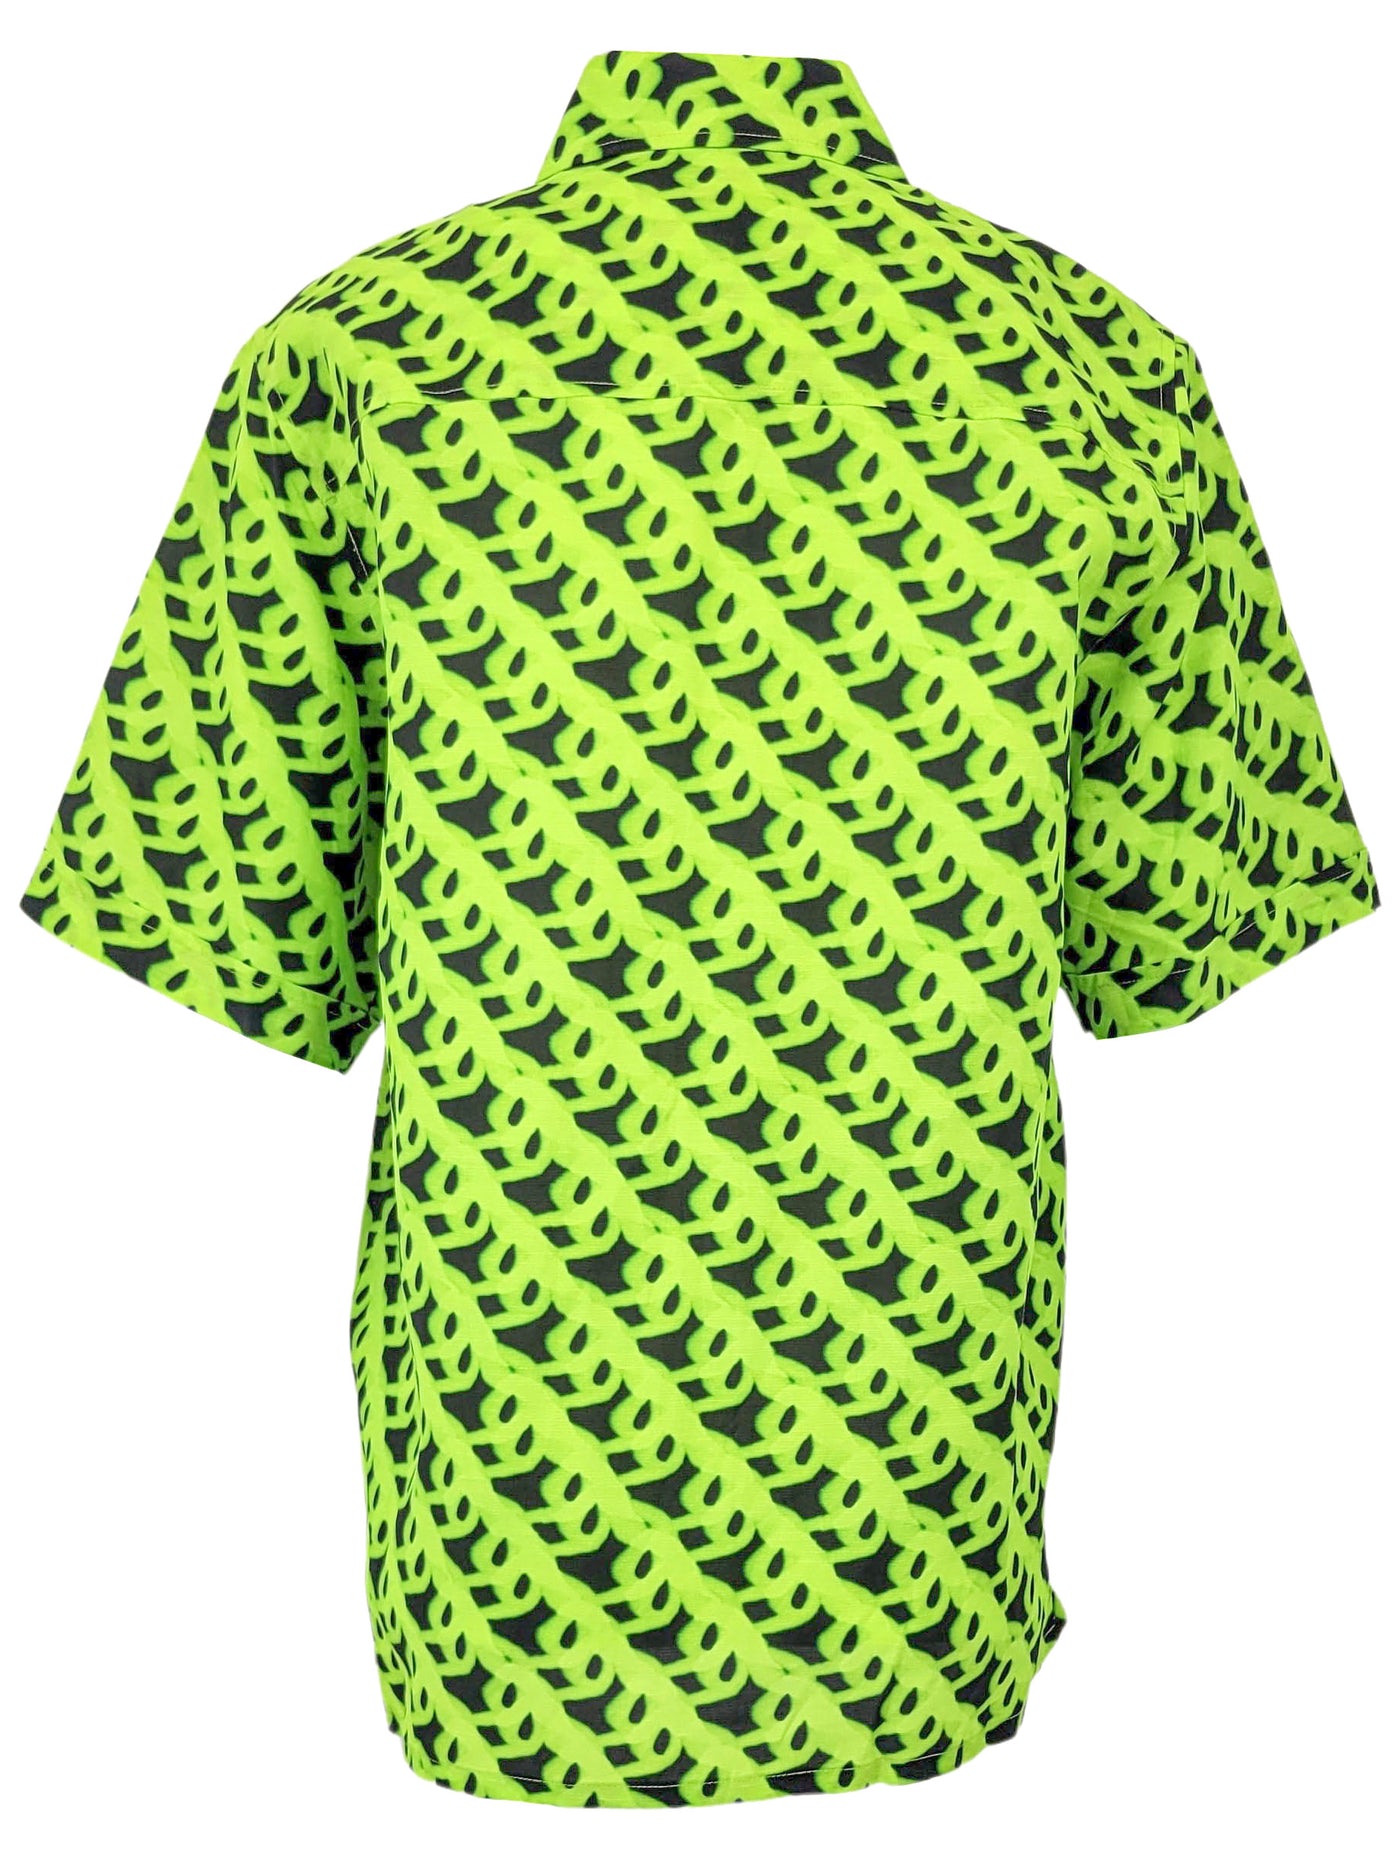 Christian Wijnants Tarus Short Sleeve Top in Lime and Black - Discounts on Christian Wijnants at UAL